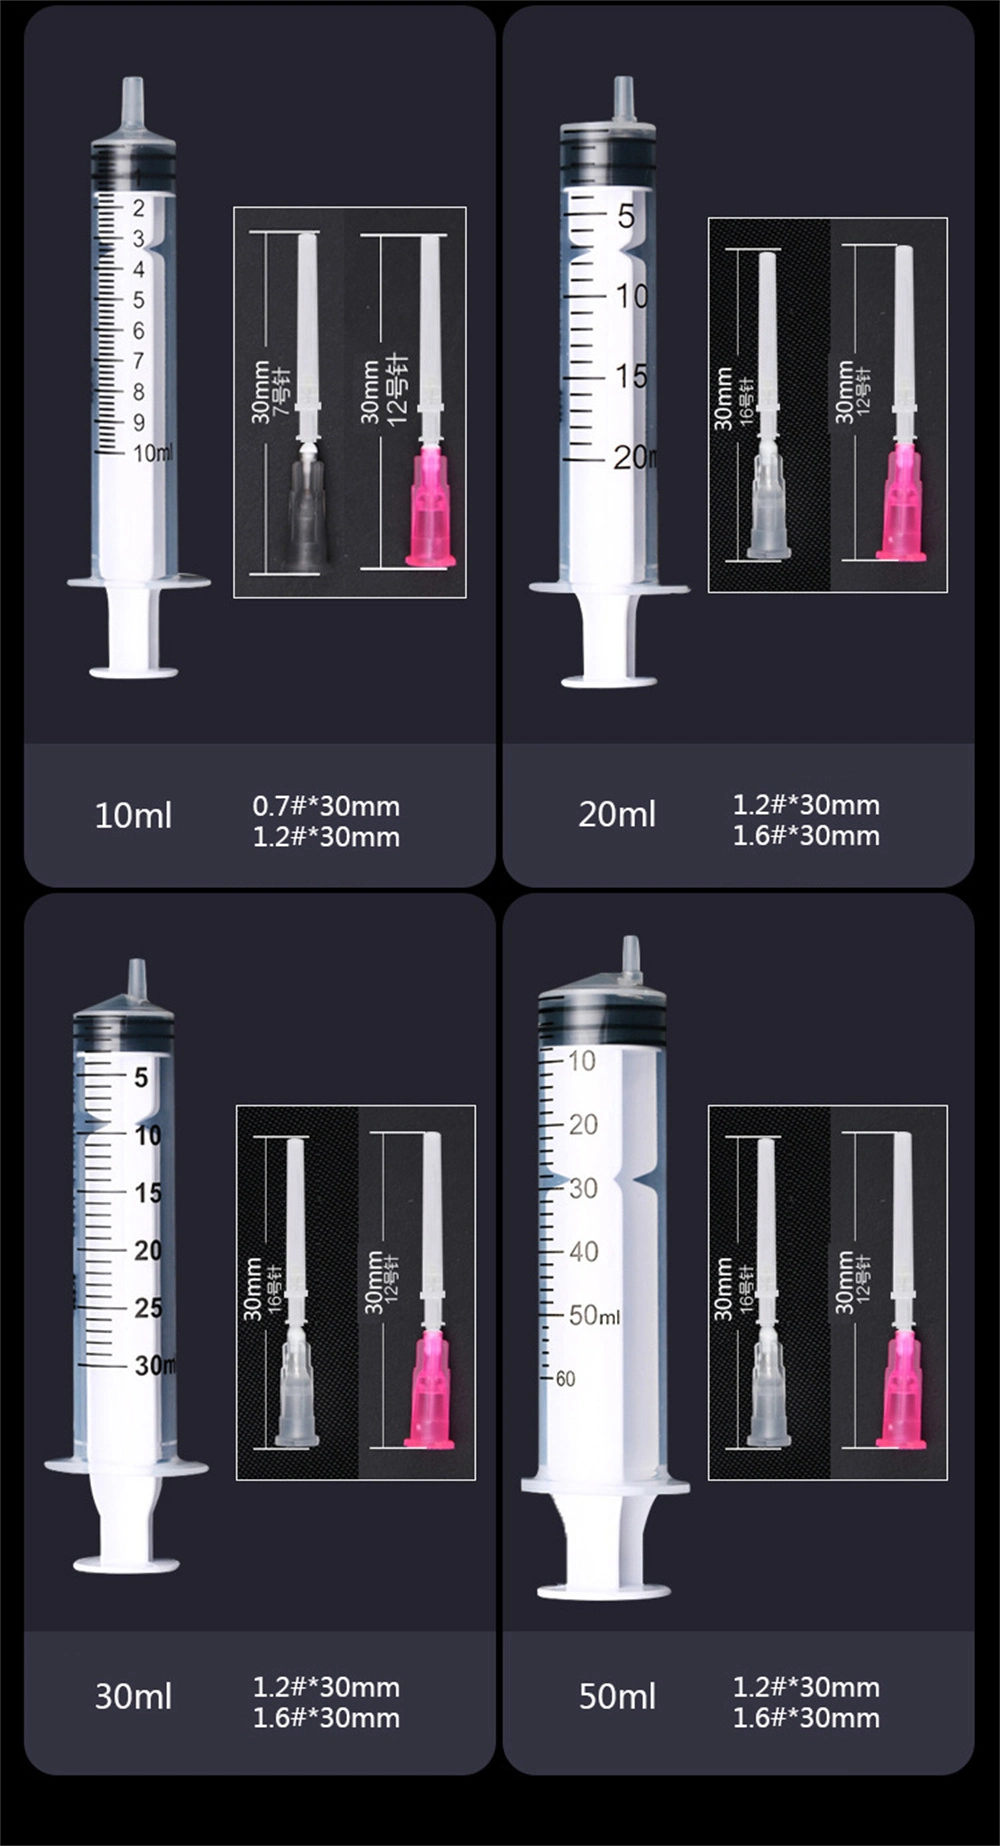 Wholesale Disposable Sterile Vaccine Safety Syringe with Needle 1ml 2ml 5ml 10ml 20ml 30ml 50ml